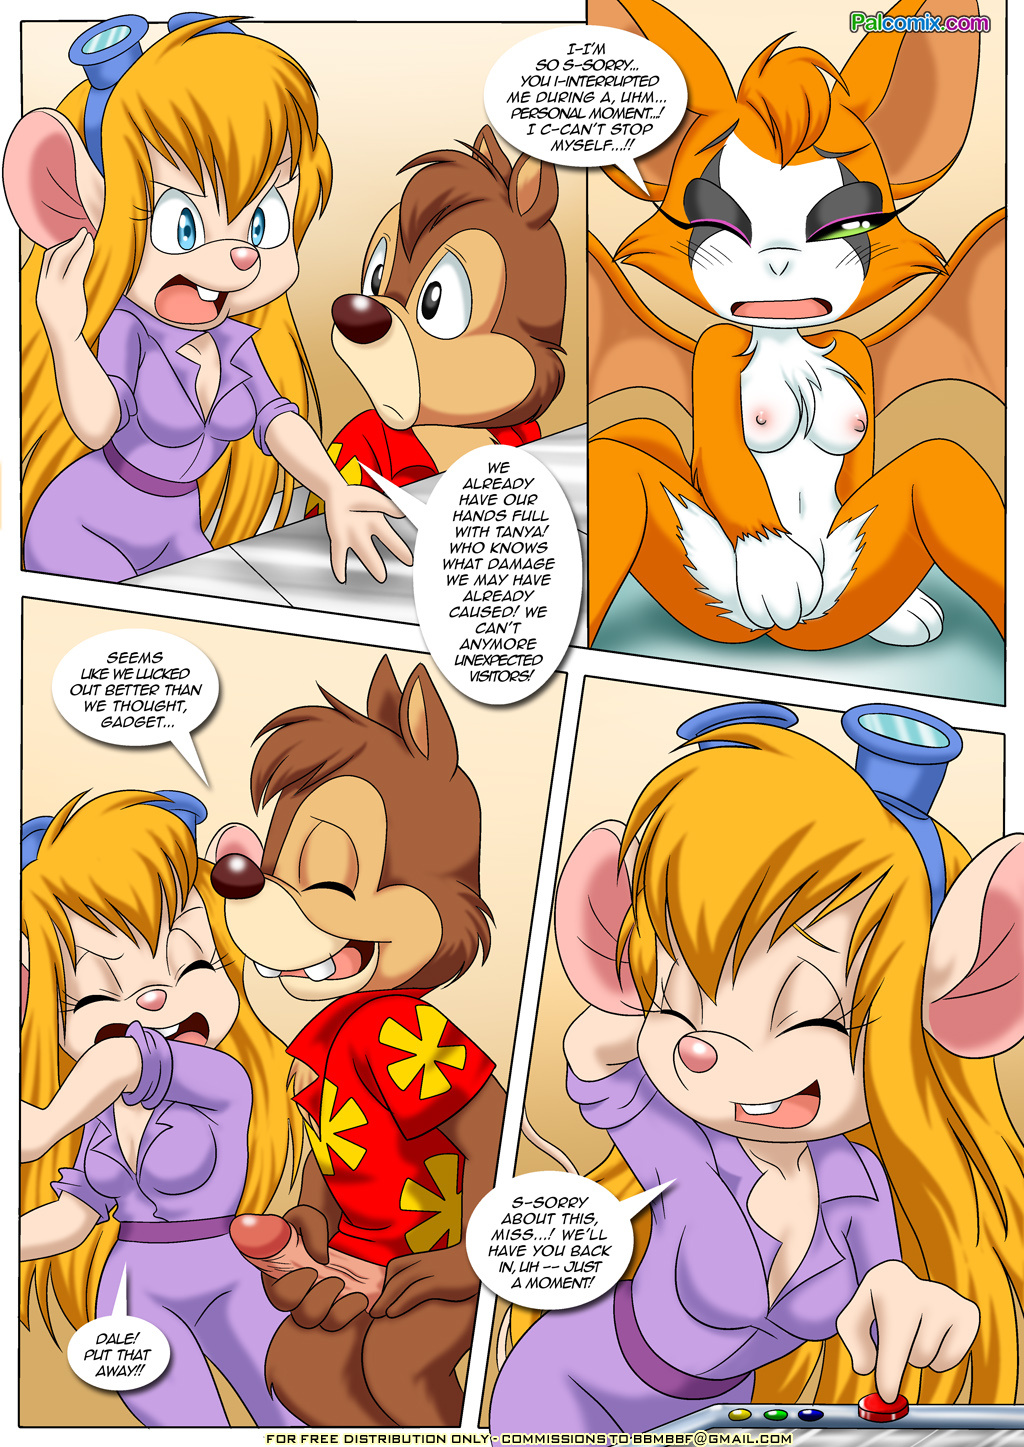 Rescue Rodents 5 - Of Mice and Machines porn comics Oral sex, Blowjob, Creampie, Cum Shots, Cum Swallow, cunnilingus, Double Penetration, fingering, Furry, Group Sex, incest, Lesbians, Masturbation, Sex and Magic, Sex Toys, Stockings, Straight, Threesome